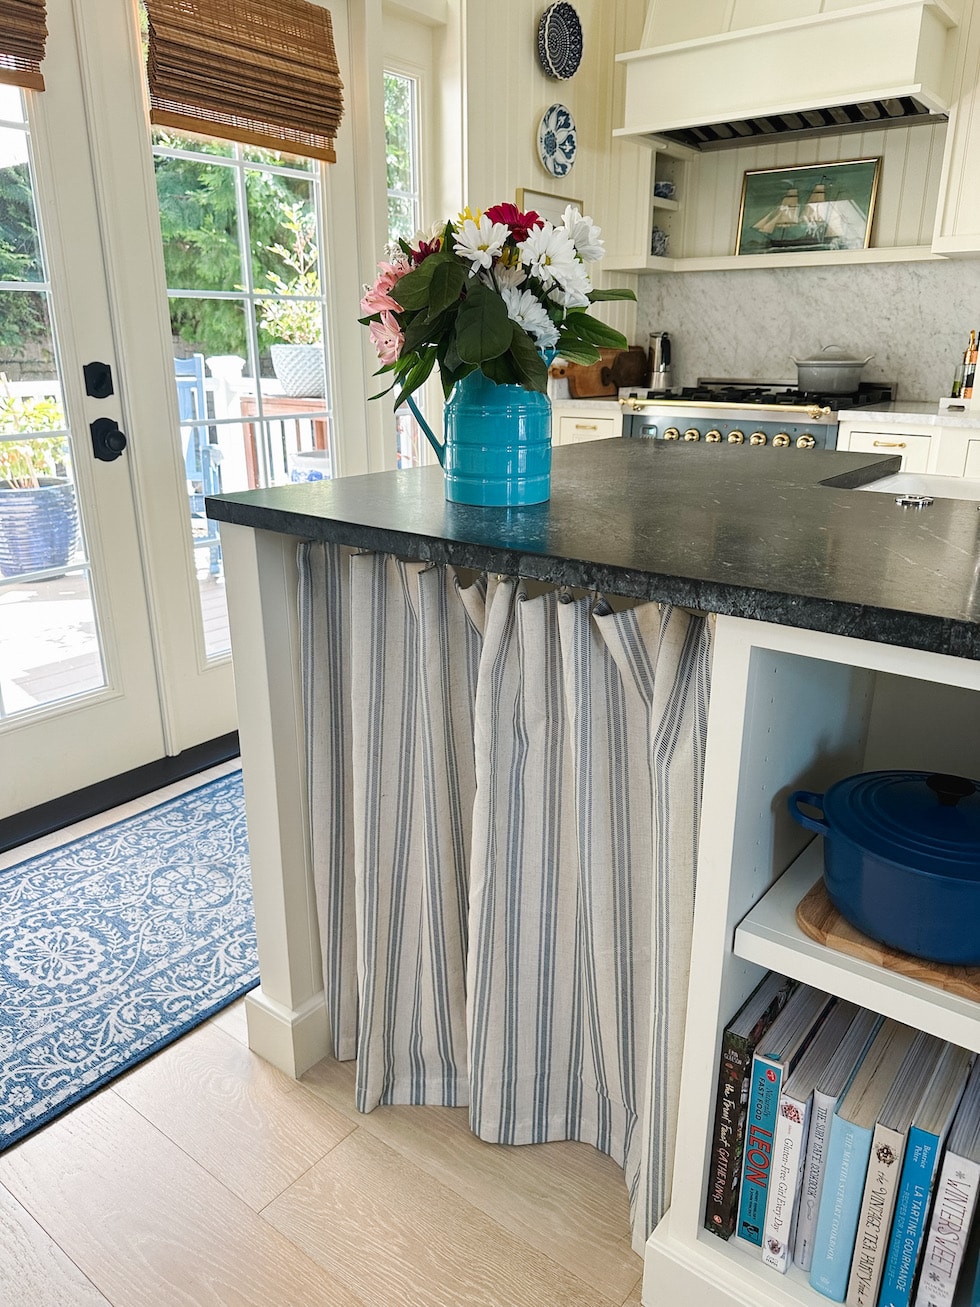 Striped kitchen cafe curtains and how to hang a rod without tools